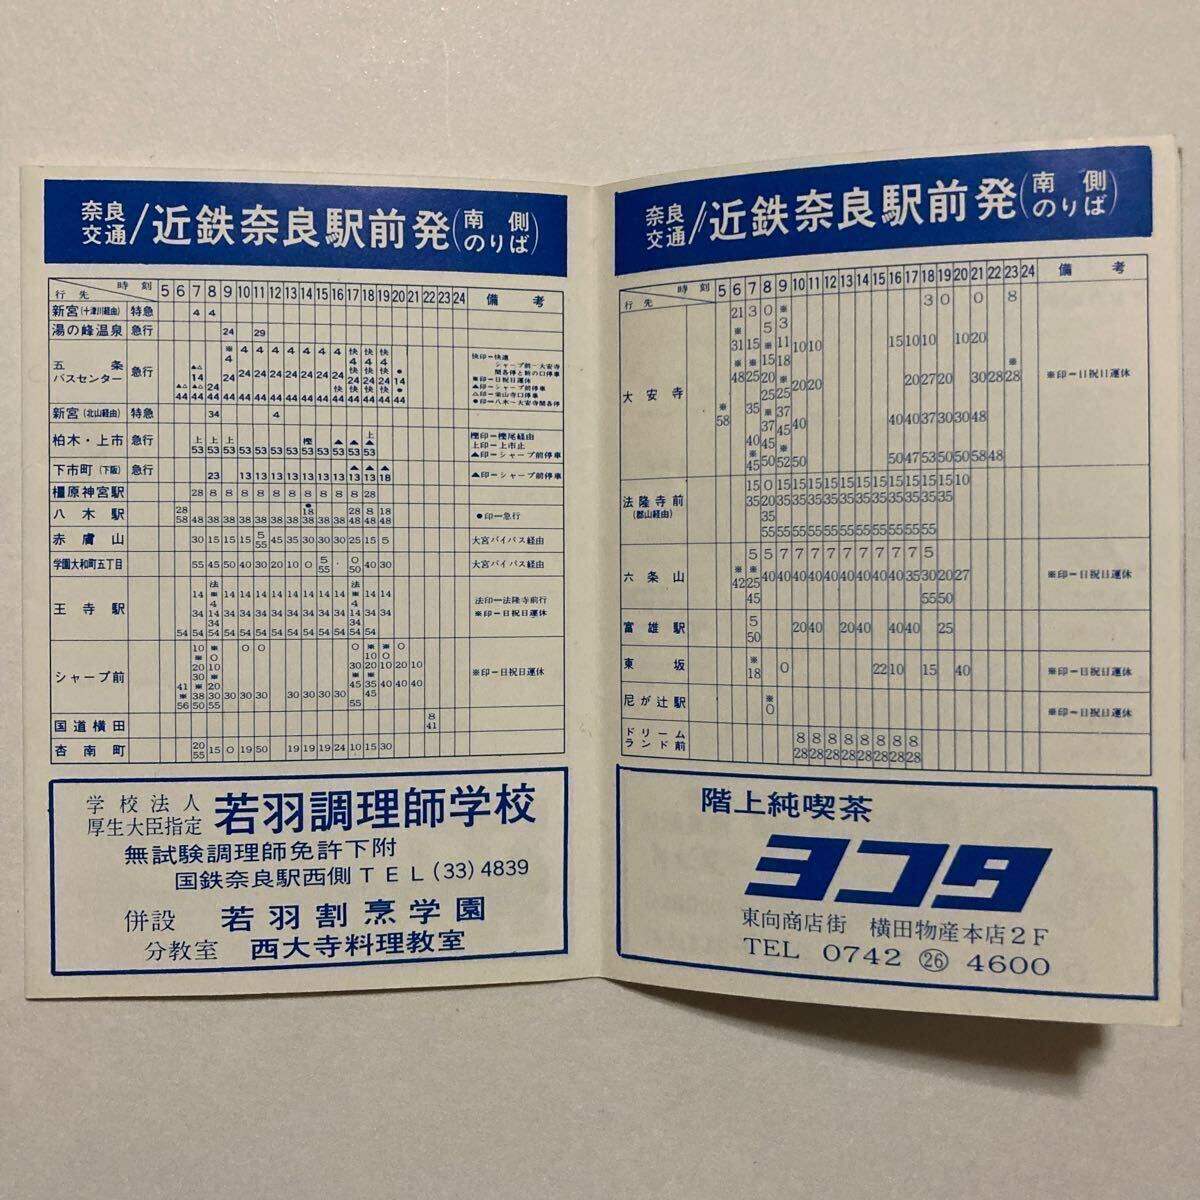  bus timetable /1974 year 10 month presently * Nara traffic / close iron Nara station front departure north side bus paste . south side bus paste . height heaven block departure / close iron Nara station departure train timetable 